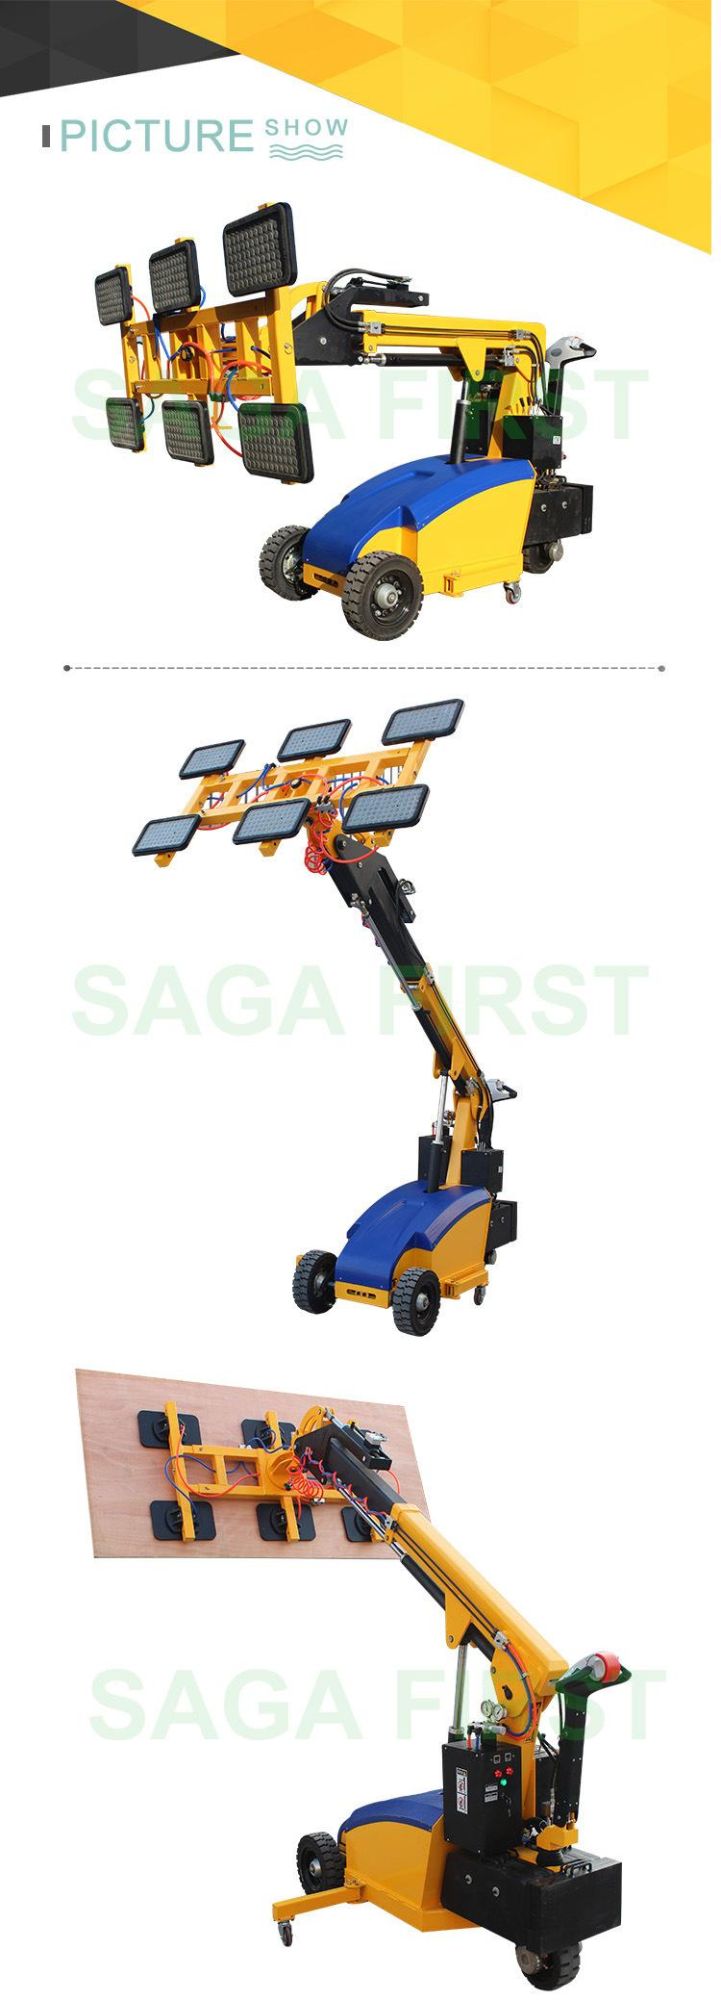 High-Efficiency Marble Wood Lifter Electric Glass Lifting Equipment 800kg